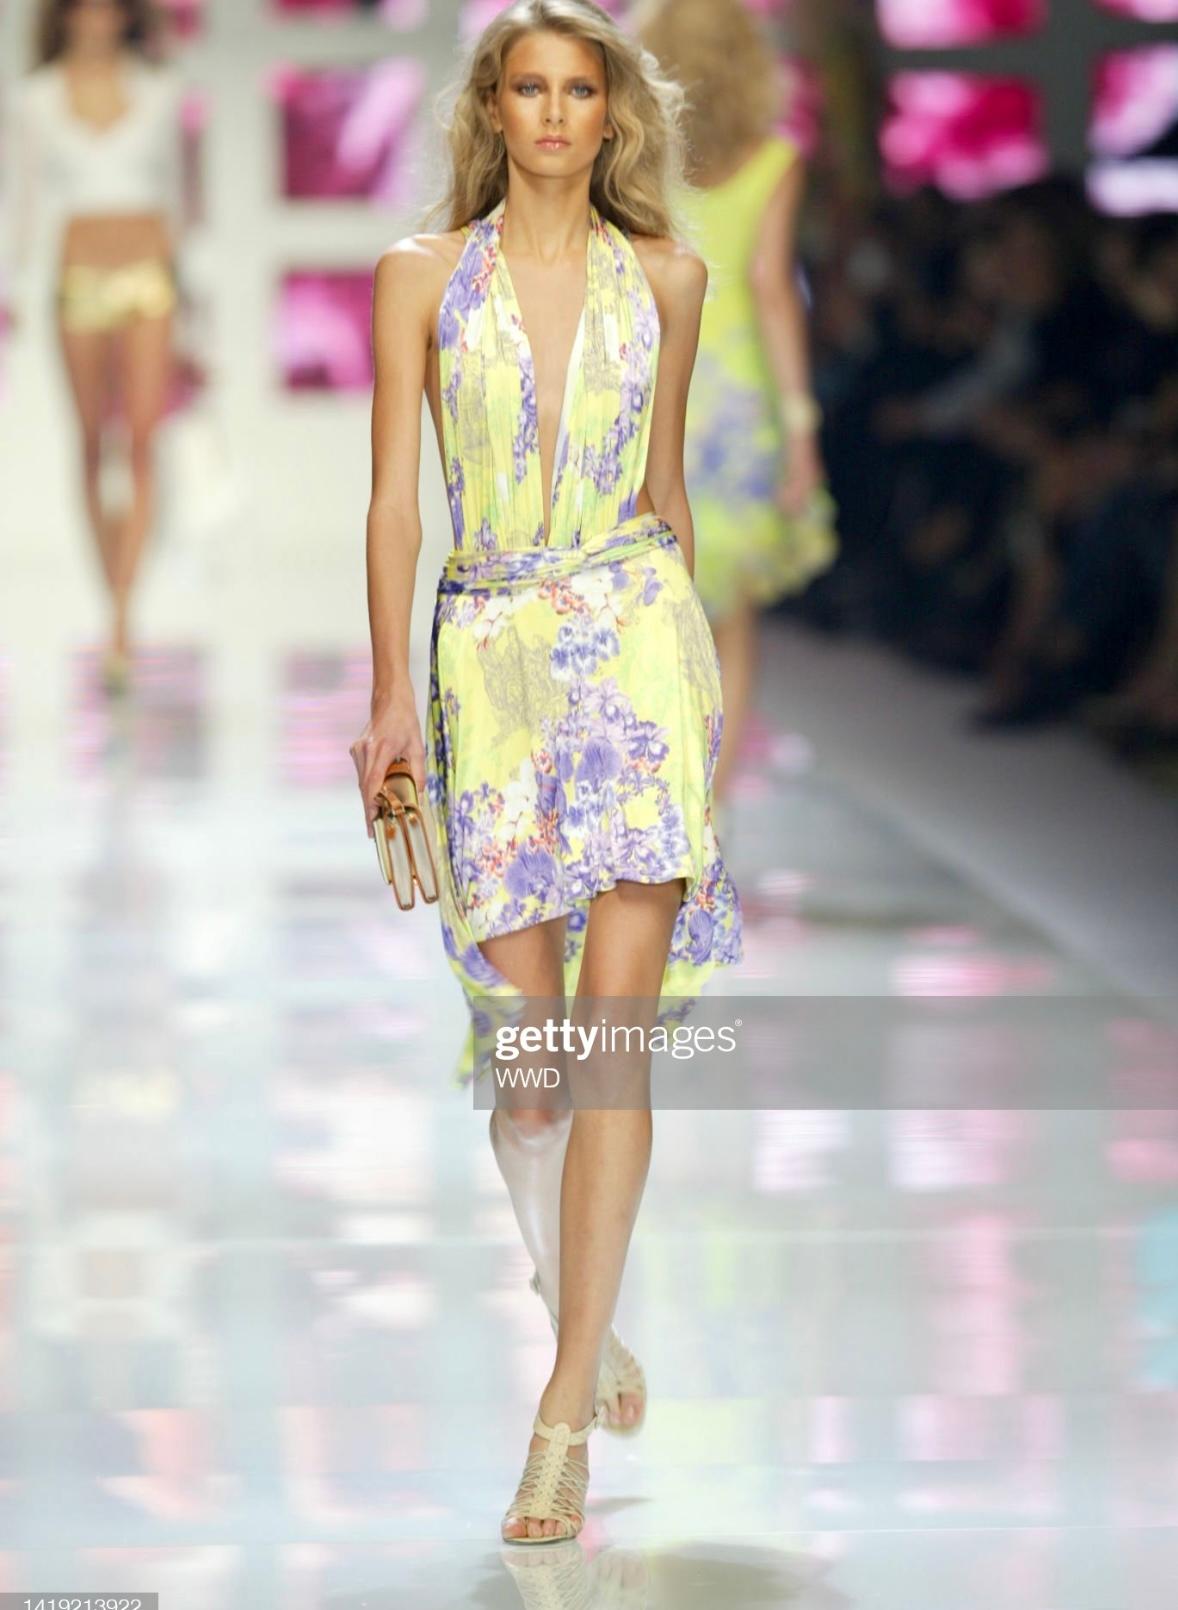 NWT S/S 2004 Versace by Donatella Yellow Orchid Floral Runway Dress 5